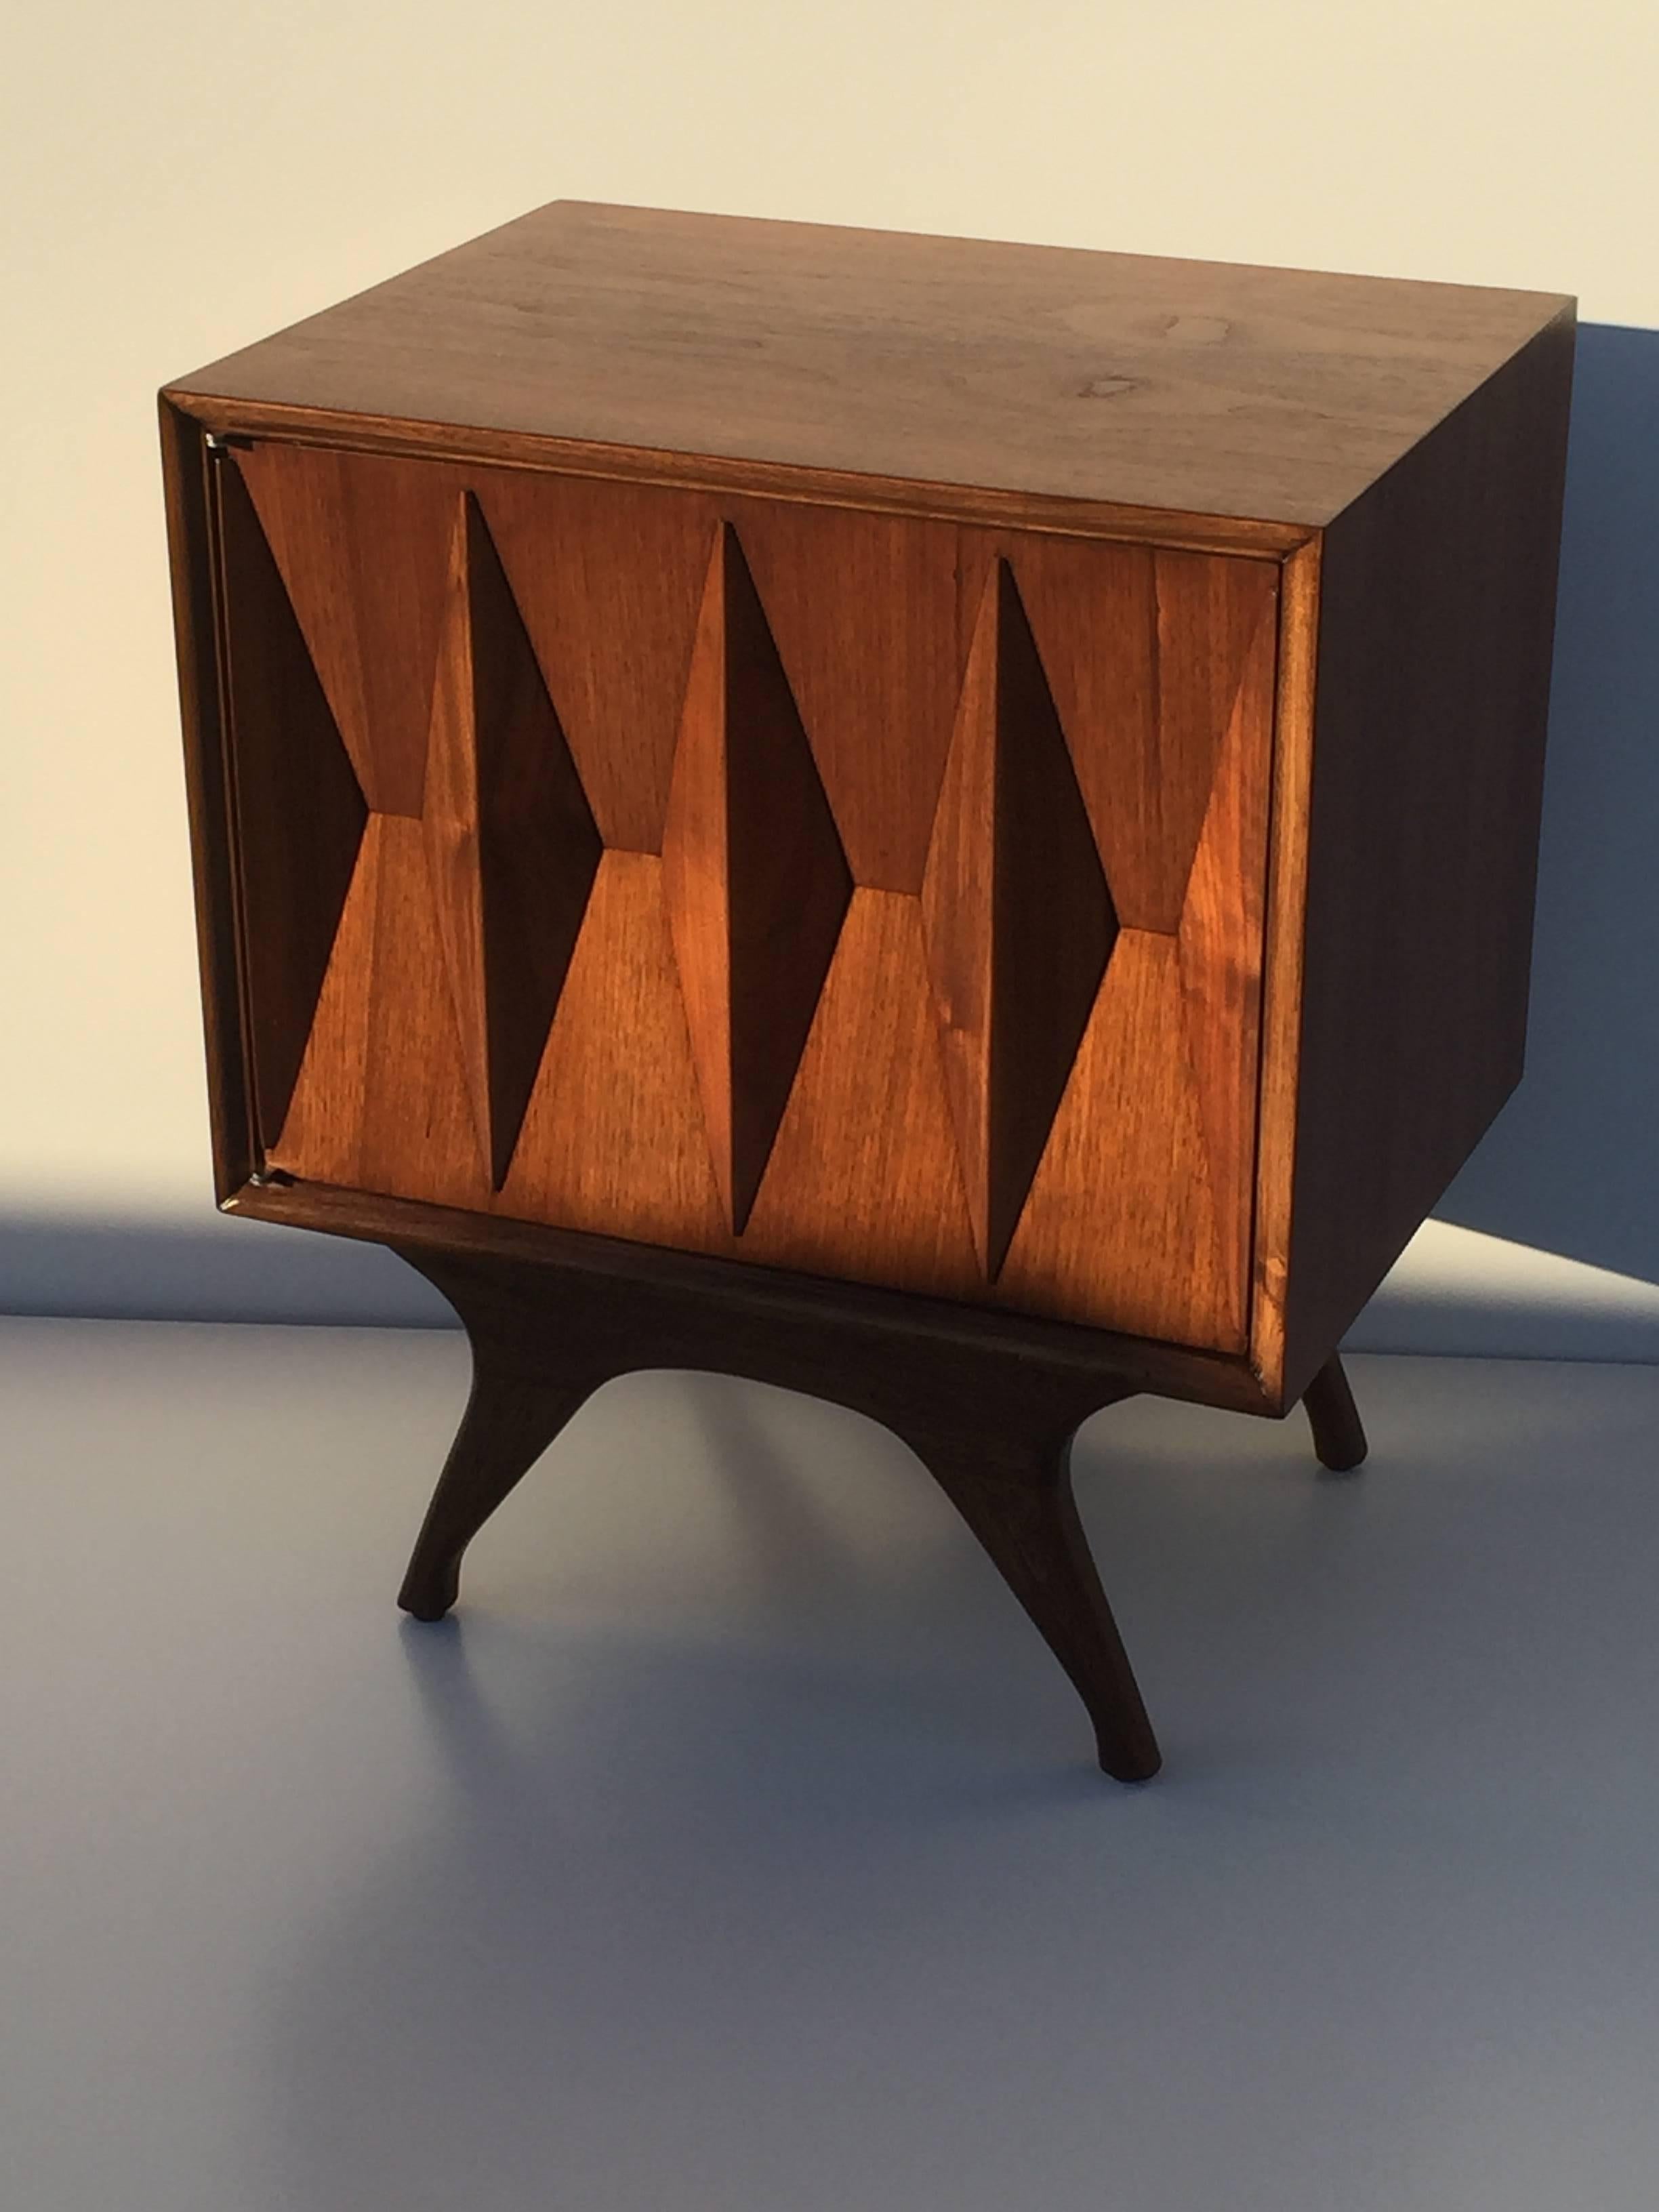 Pair of Albert Parvin designed sculptural diamond front nightstands end tables for American of Martinsville.